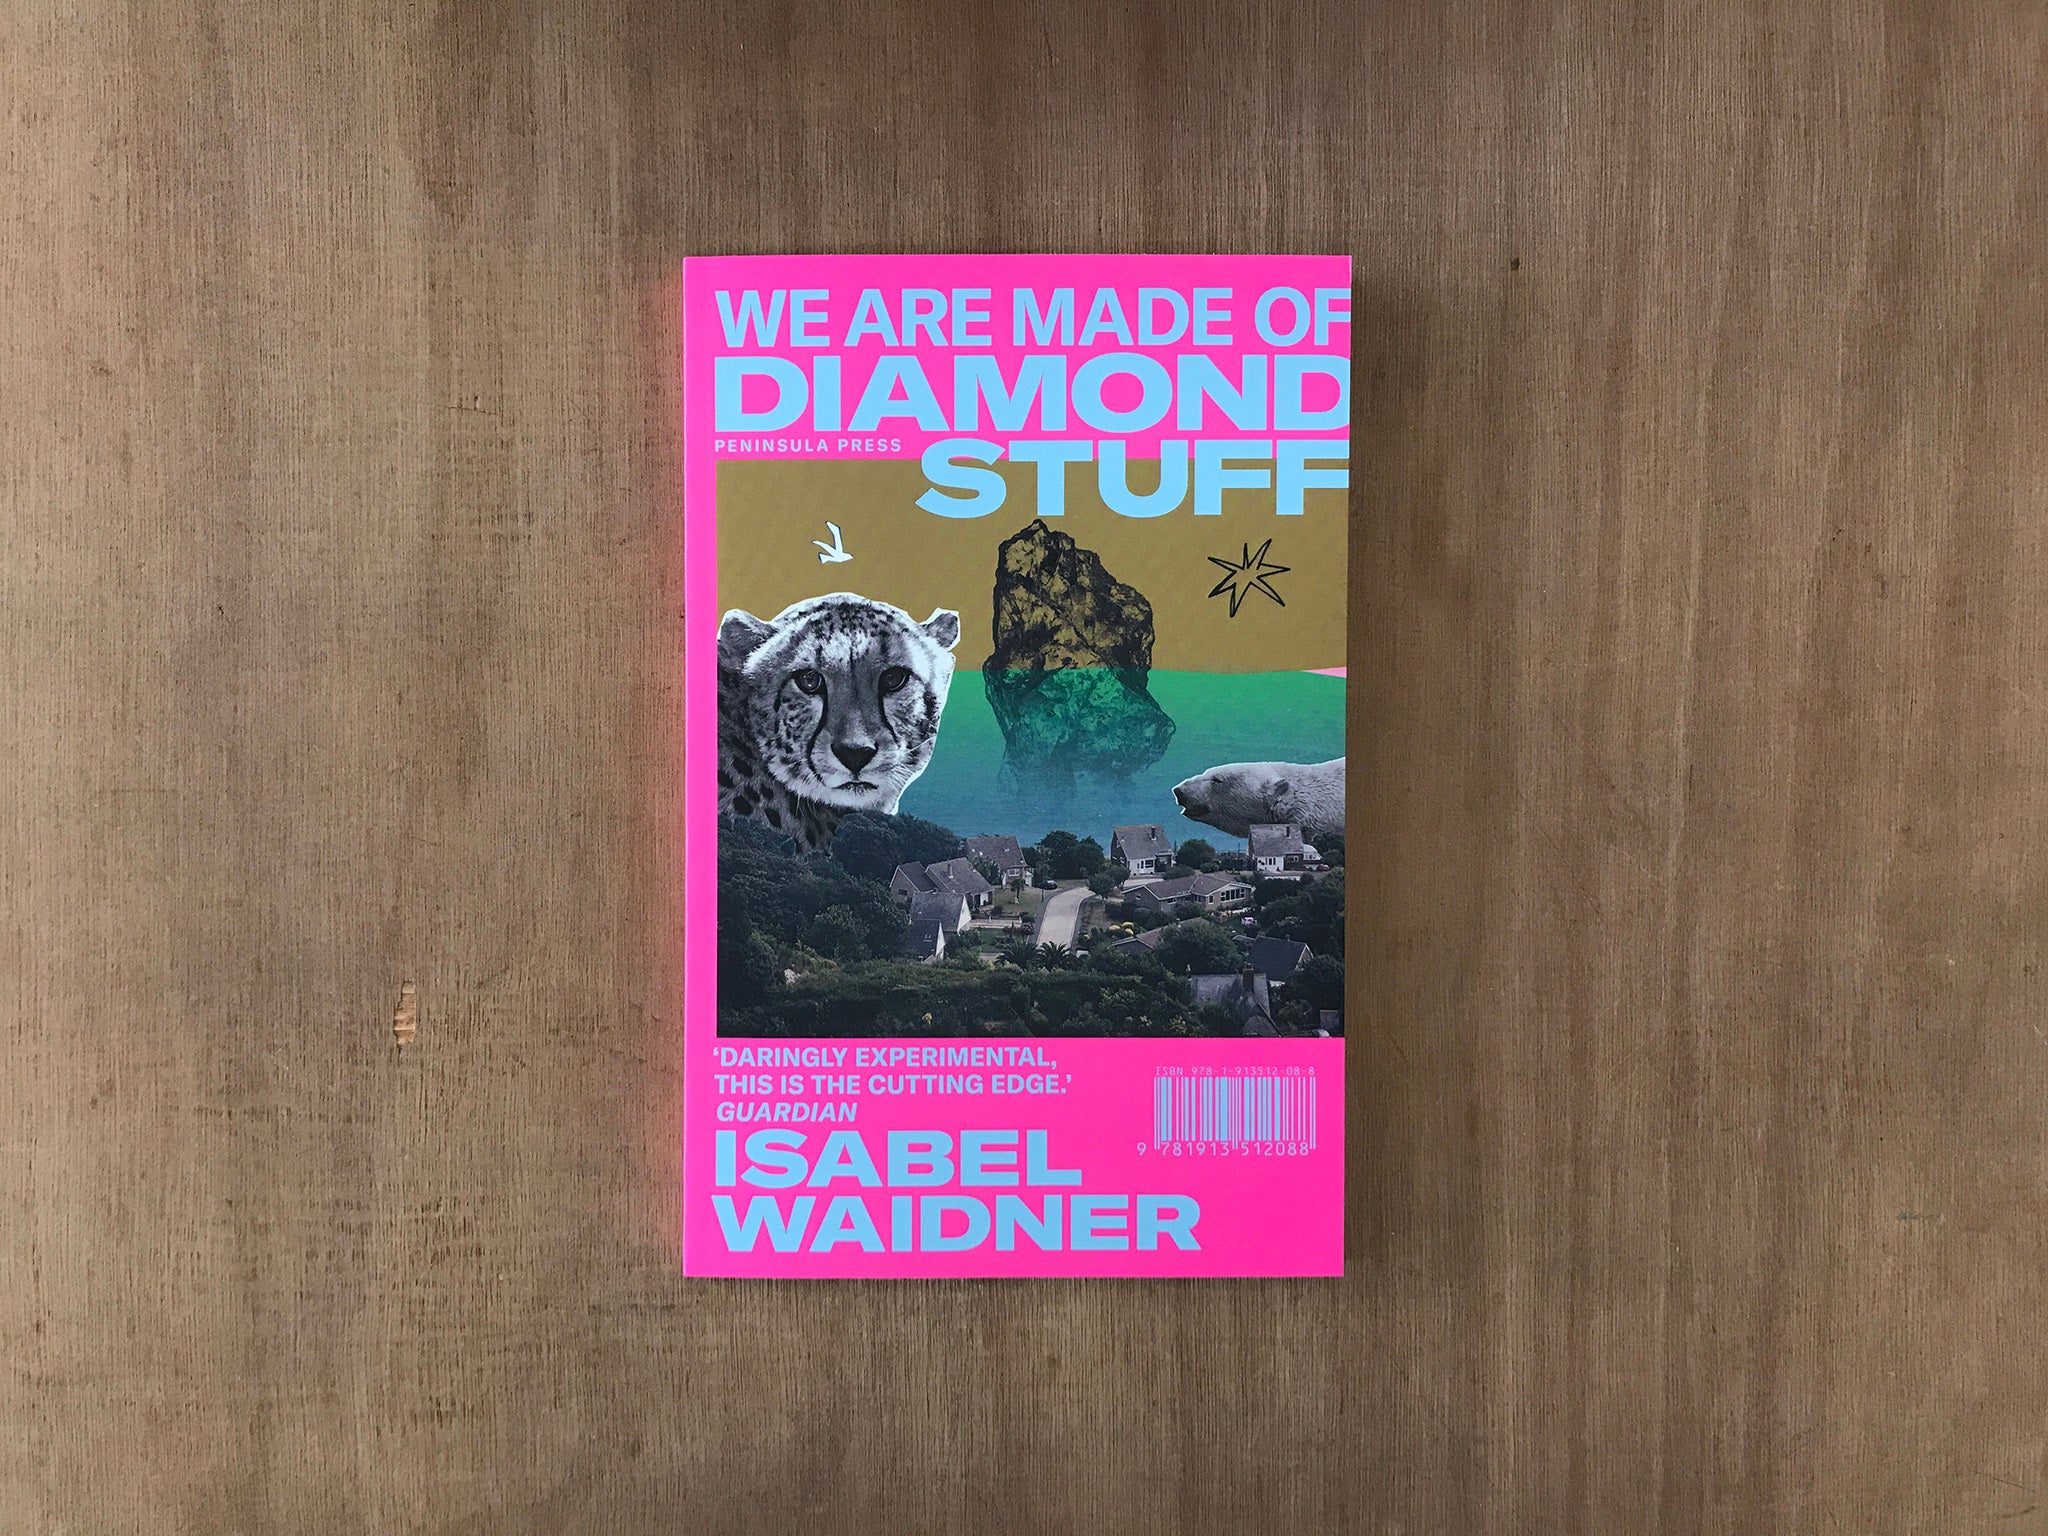 WE ARE MADE OF DIAMOND STUFF by Isabel Waidner